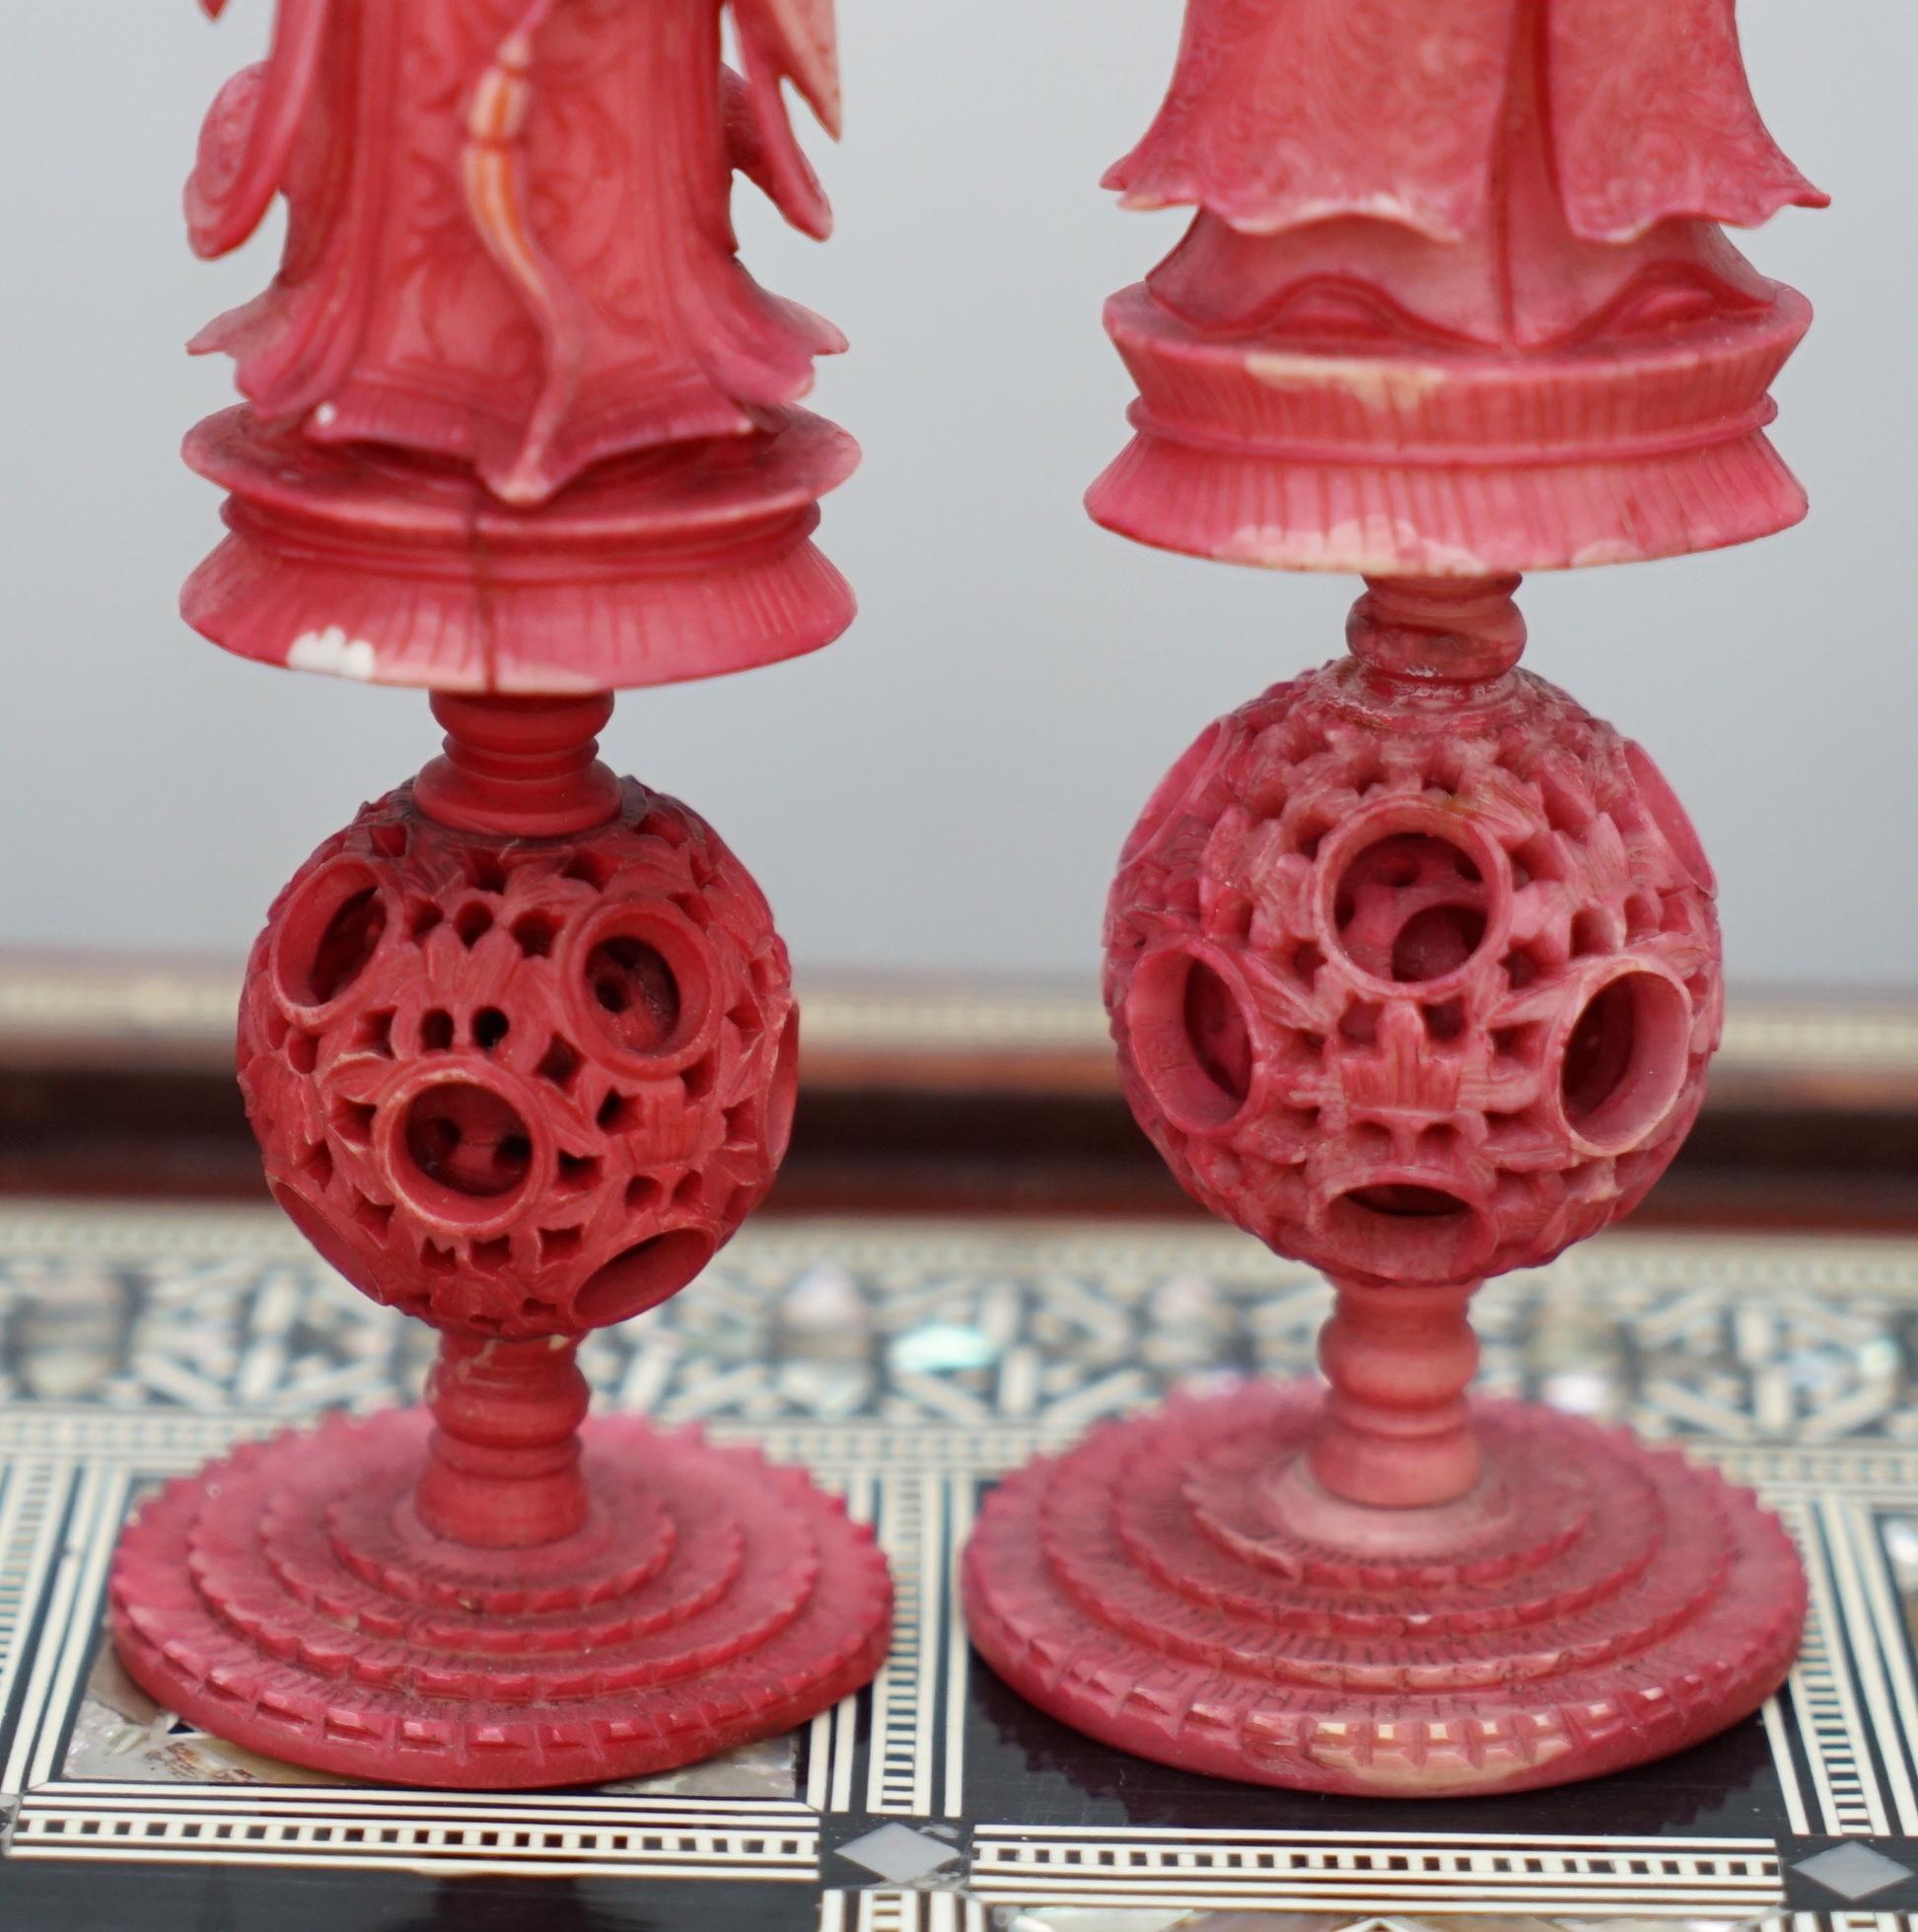 Rare 19th Century Hand-Carved Chinese Puzzle Ball Chess Set Exquisite Craft Work 3